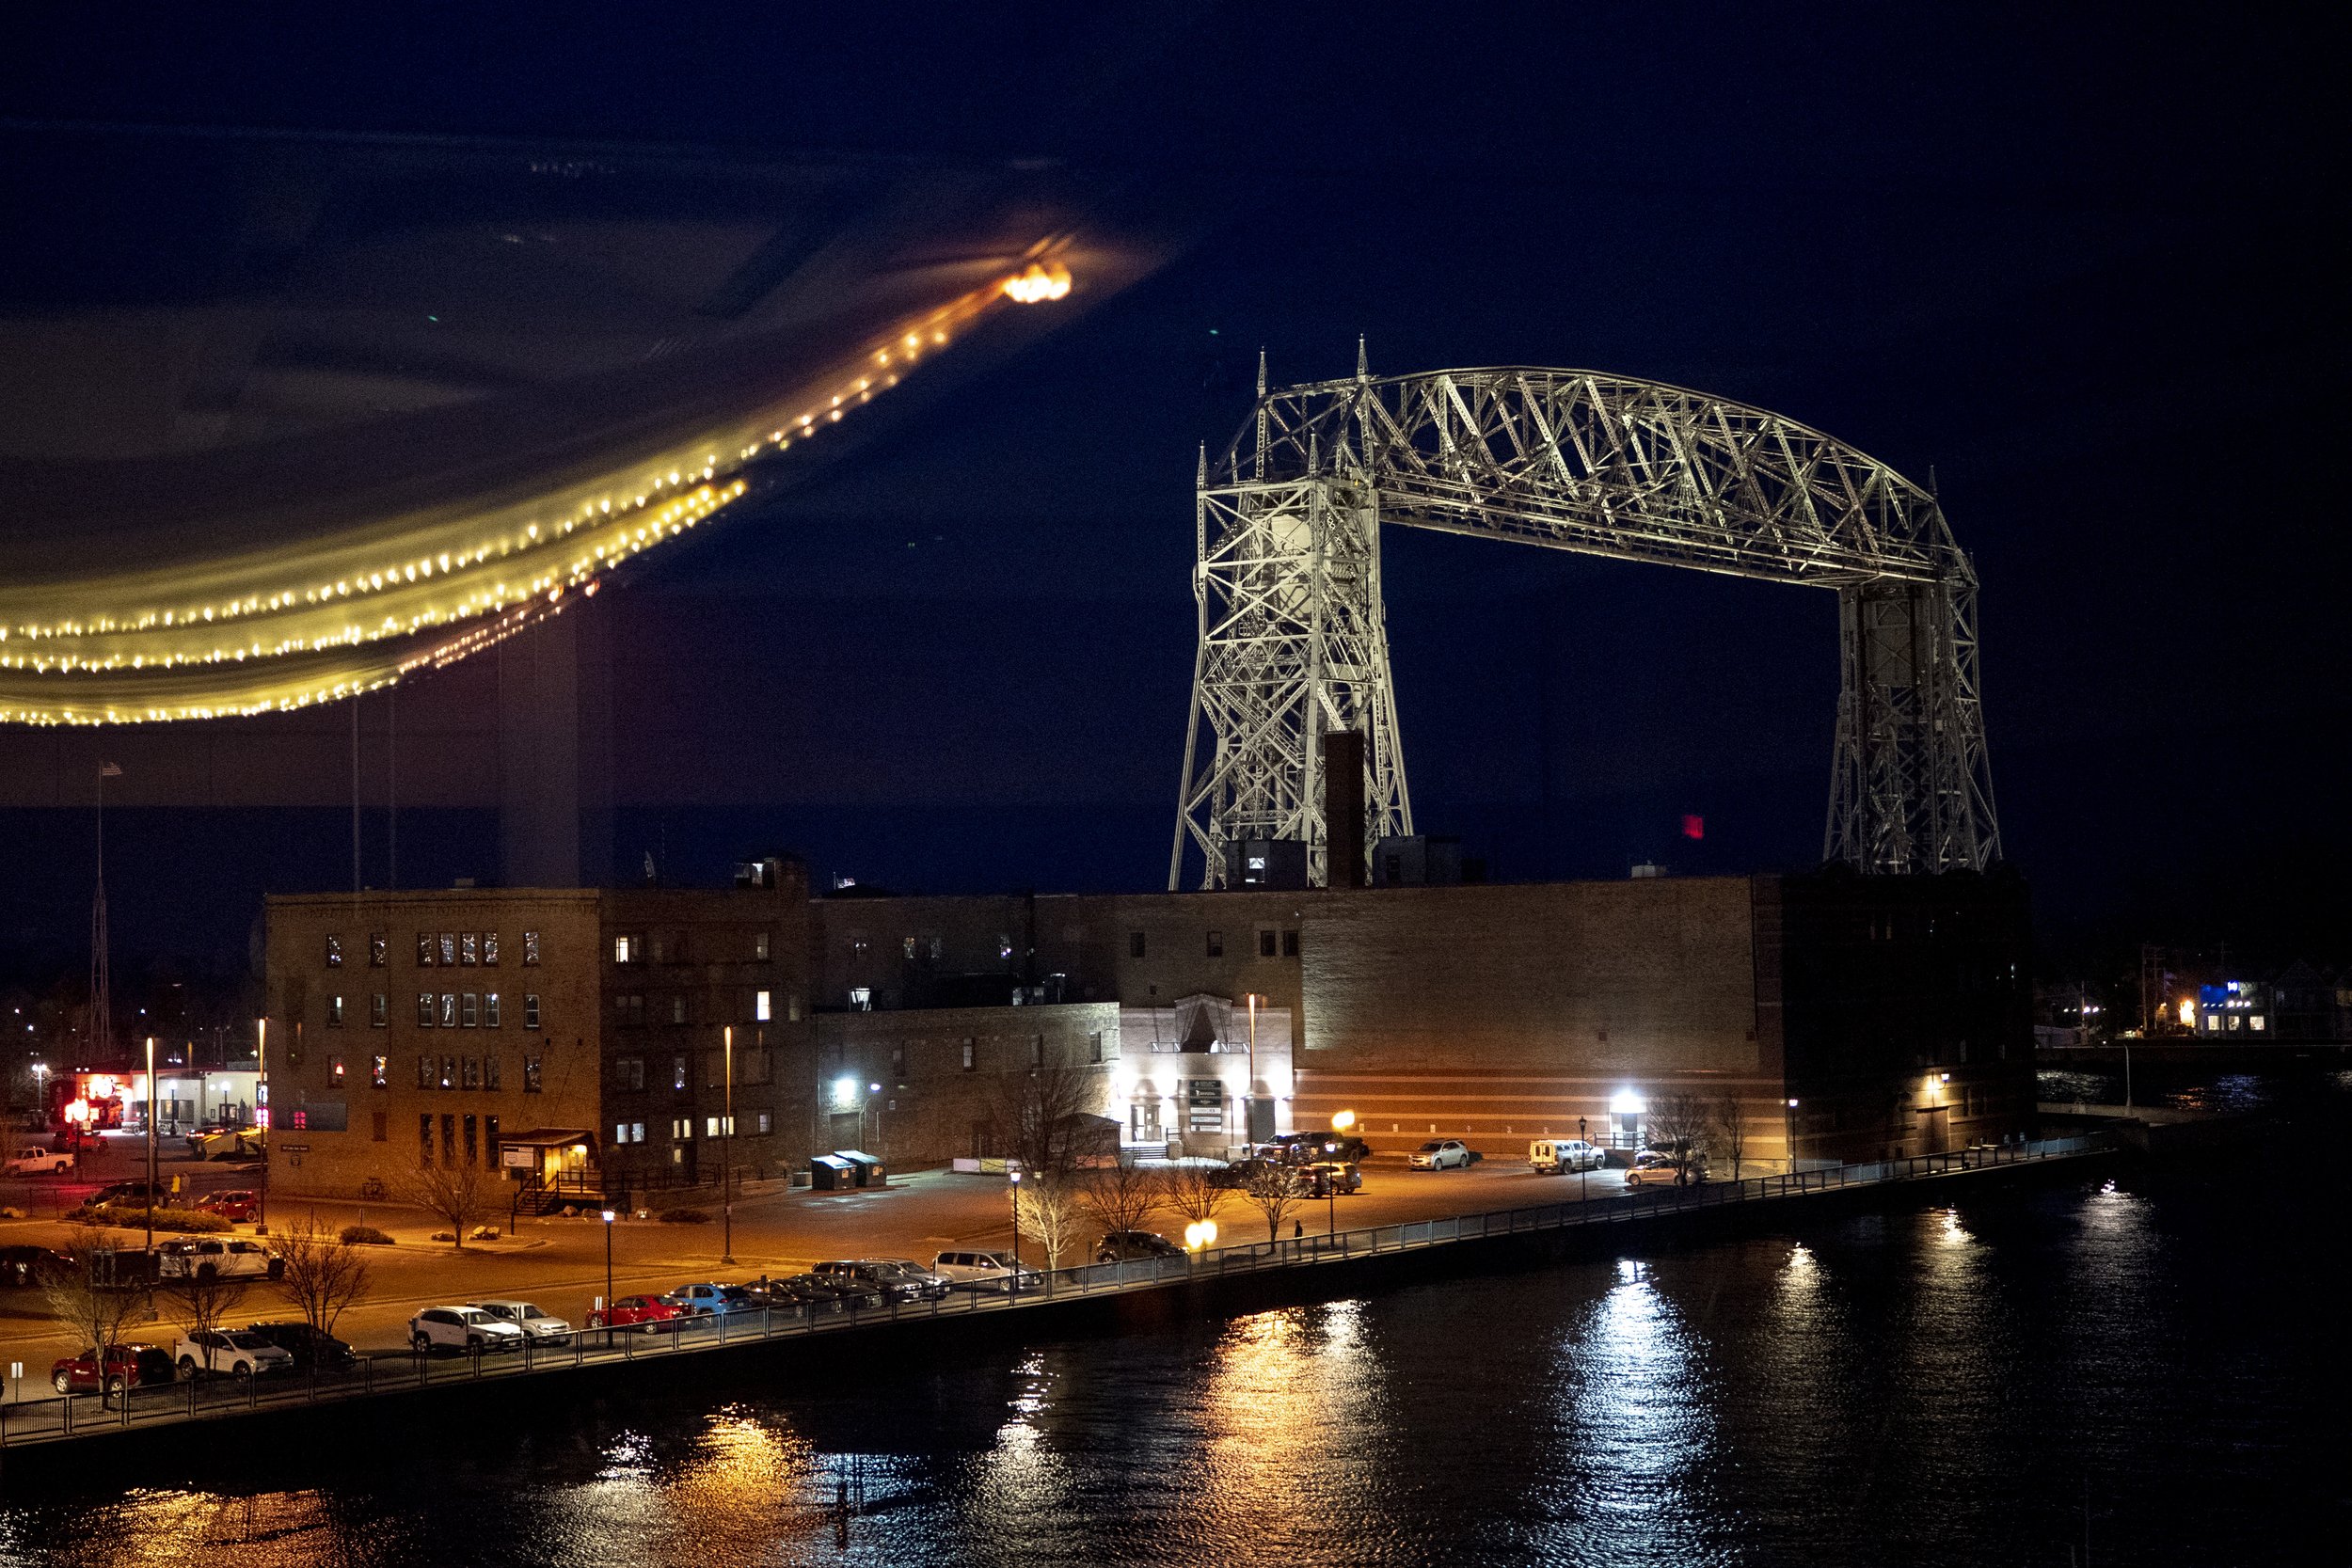  A reflection of prom light decorations is cast in a window overlooking the Aerial Lift Bridge in Duluth, Minn.  